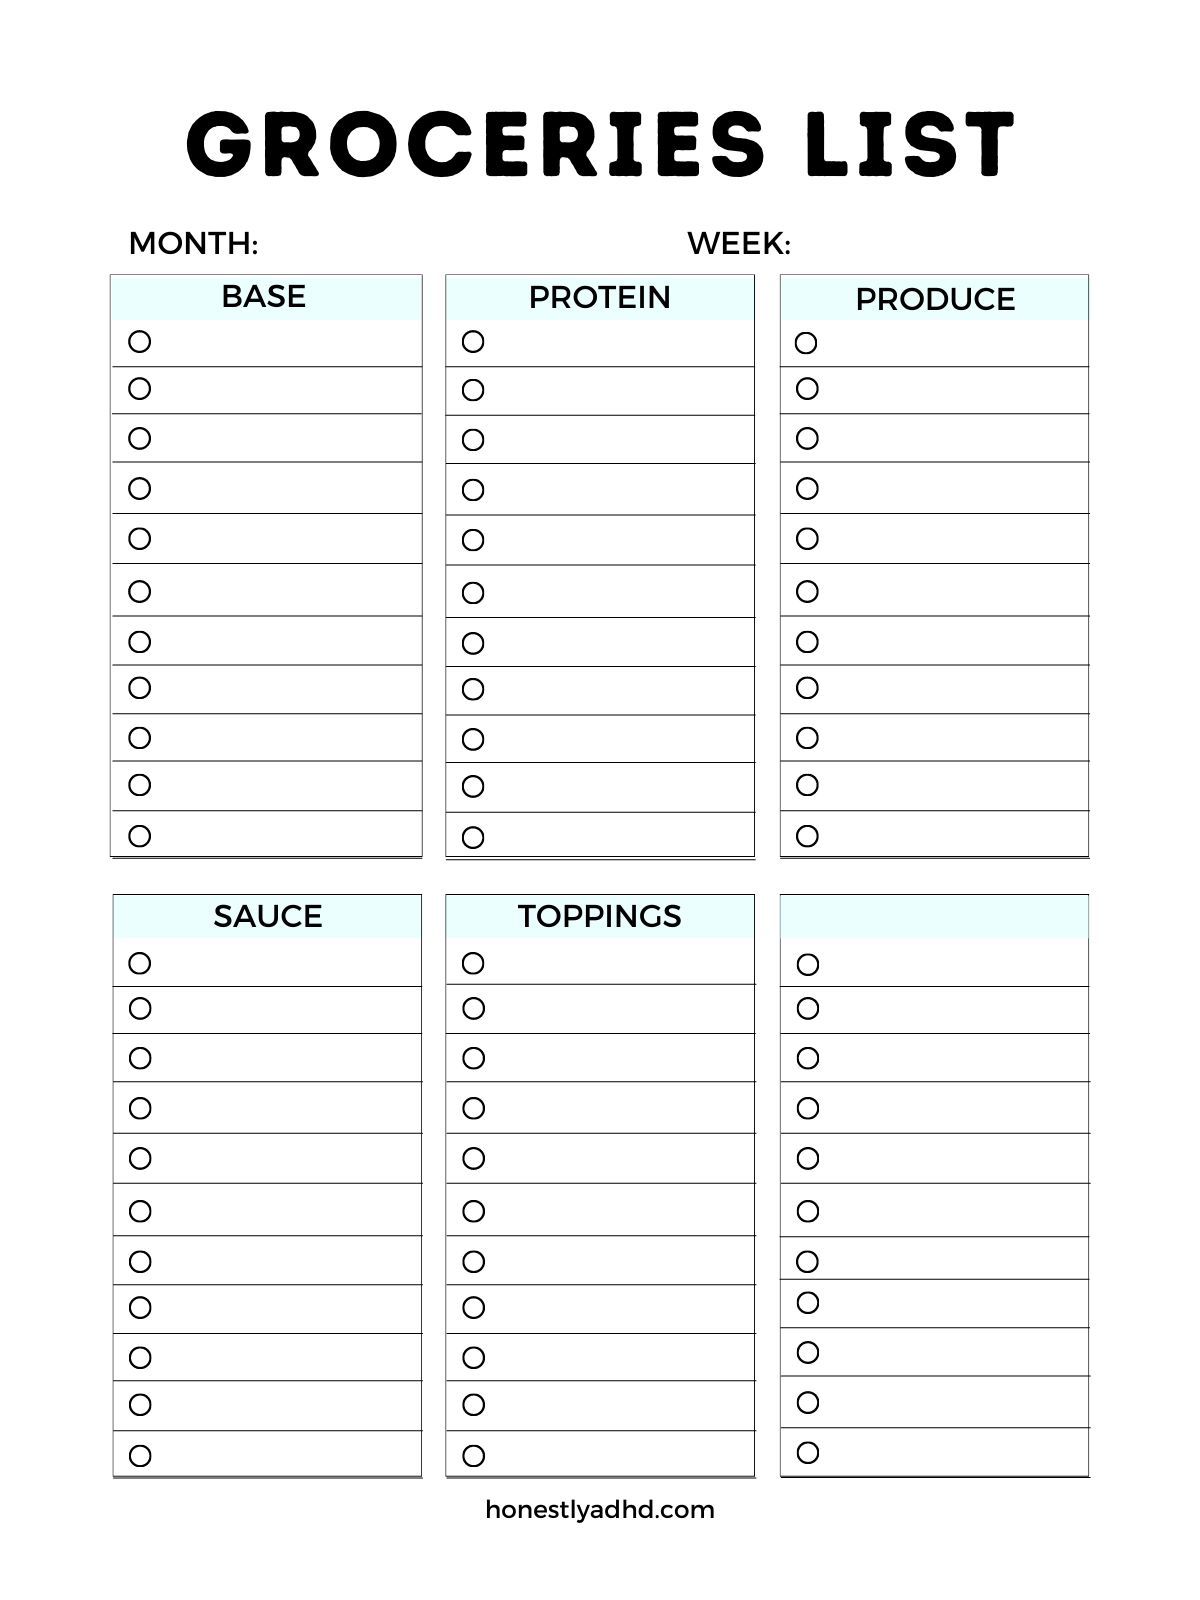 A printable grocery list sheet as part of a printable ADHD meal planner, with food categorized for the ADHD brain.